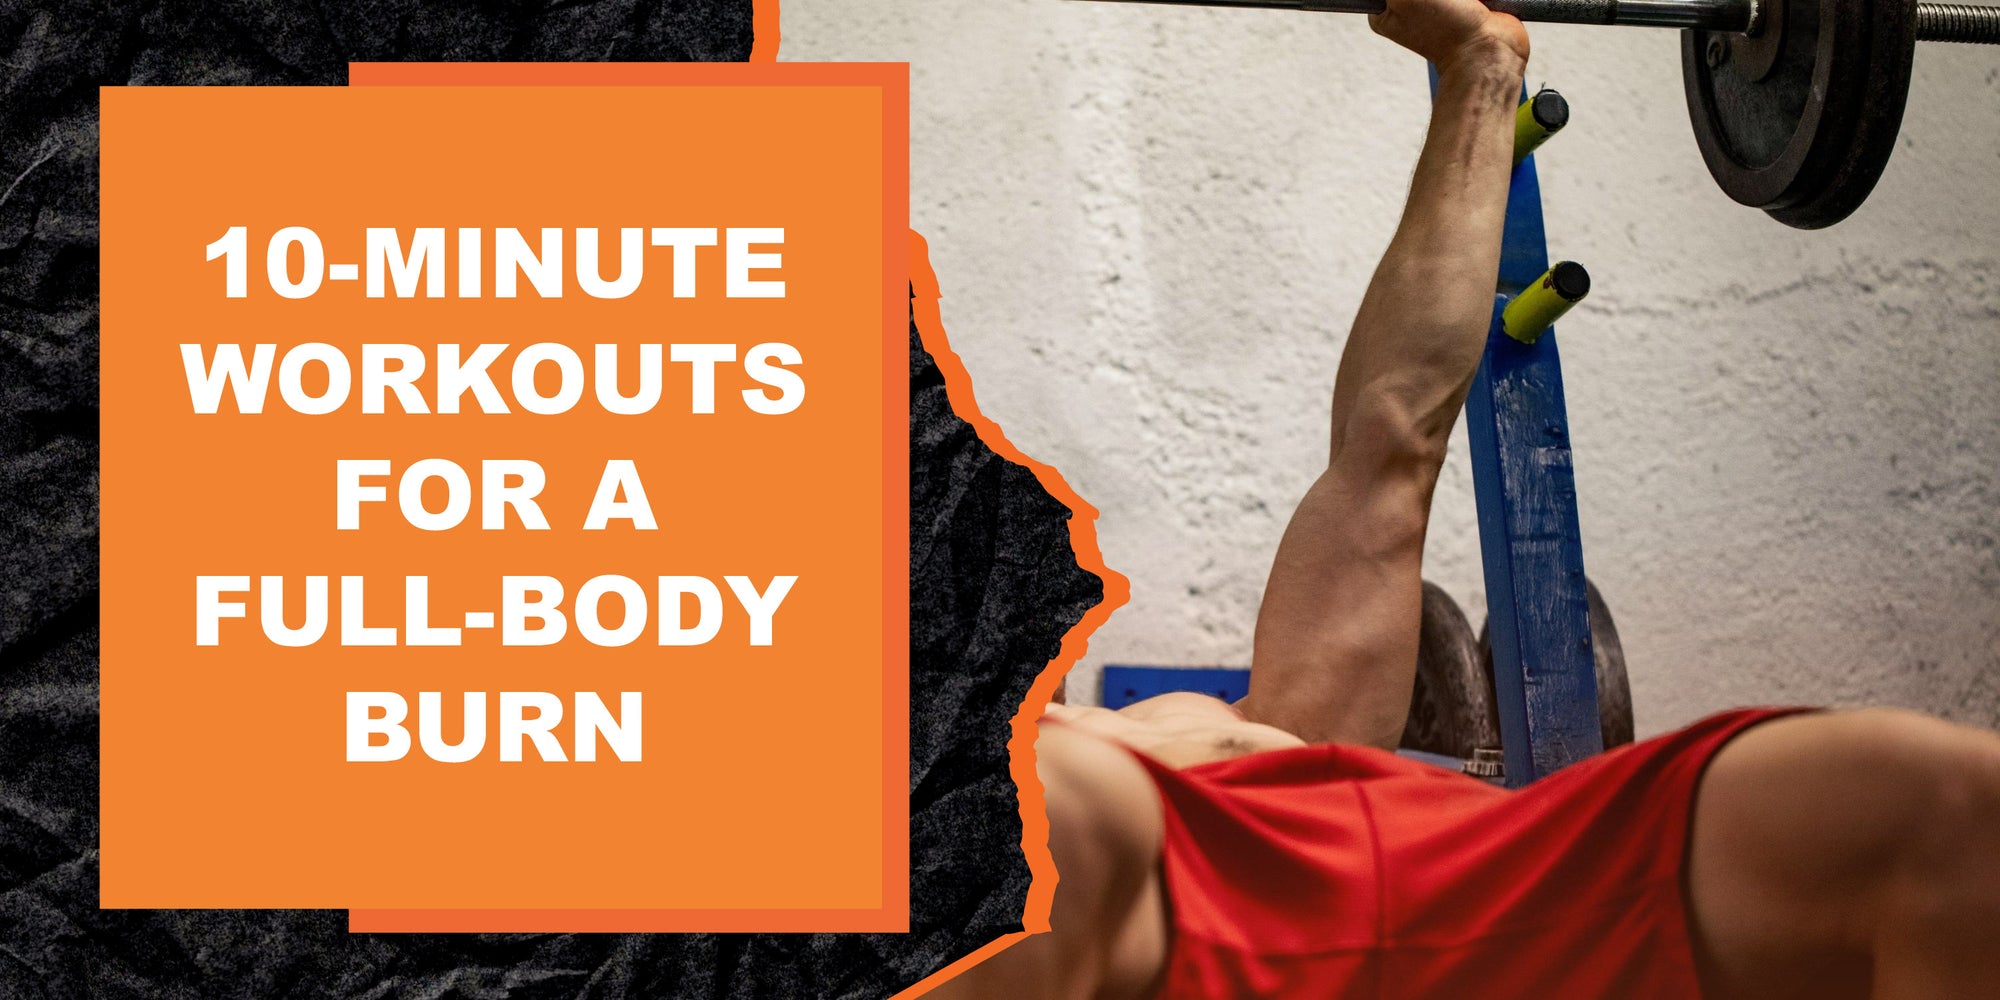 10-Minute Workouts for a Full-Body Burn